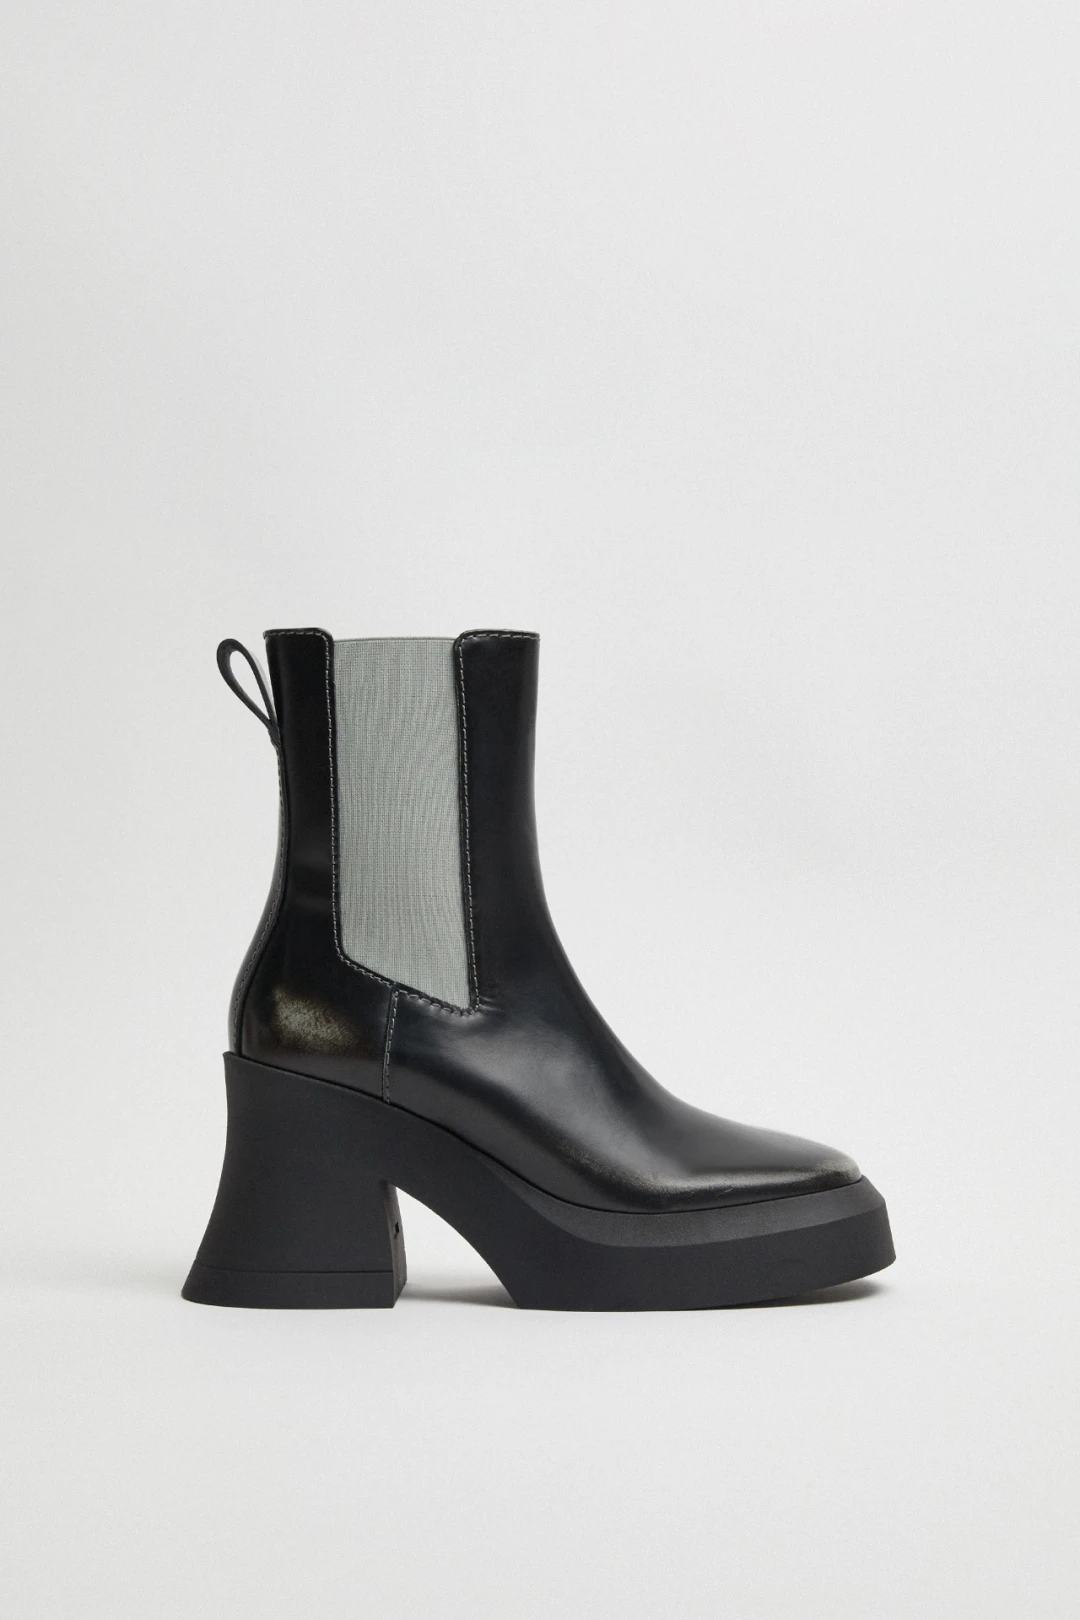 Analu Grey Ankle Boots | Miista Europe | Made in Portugal